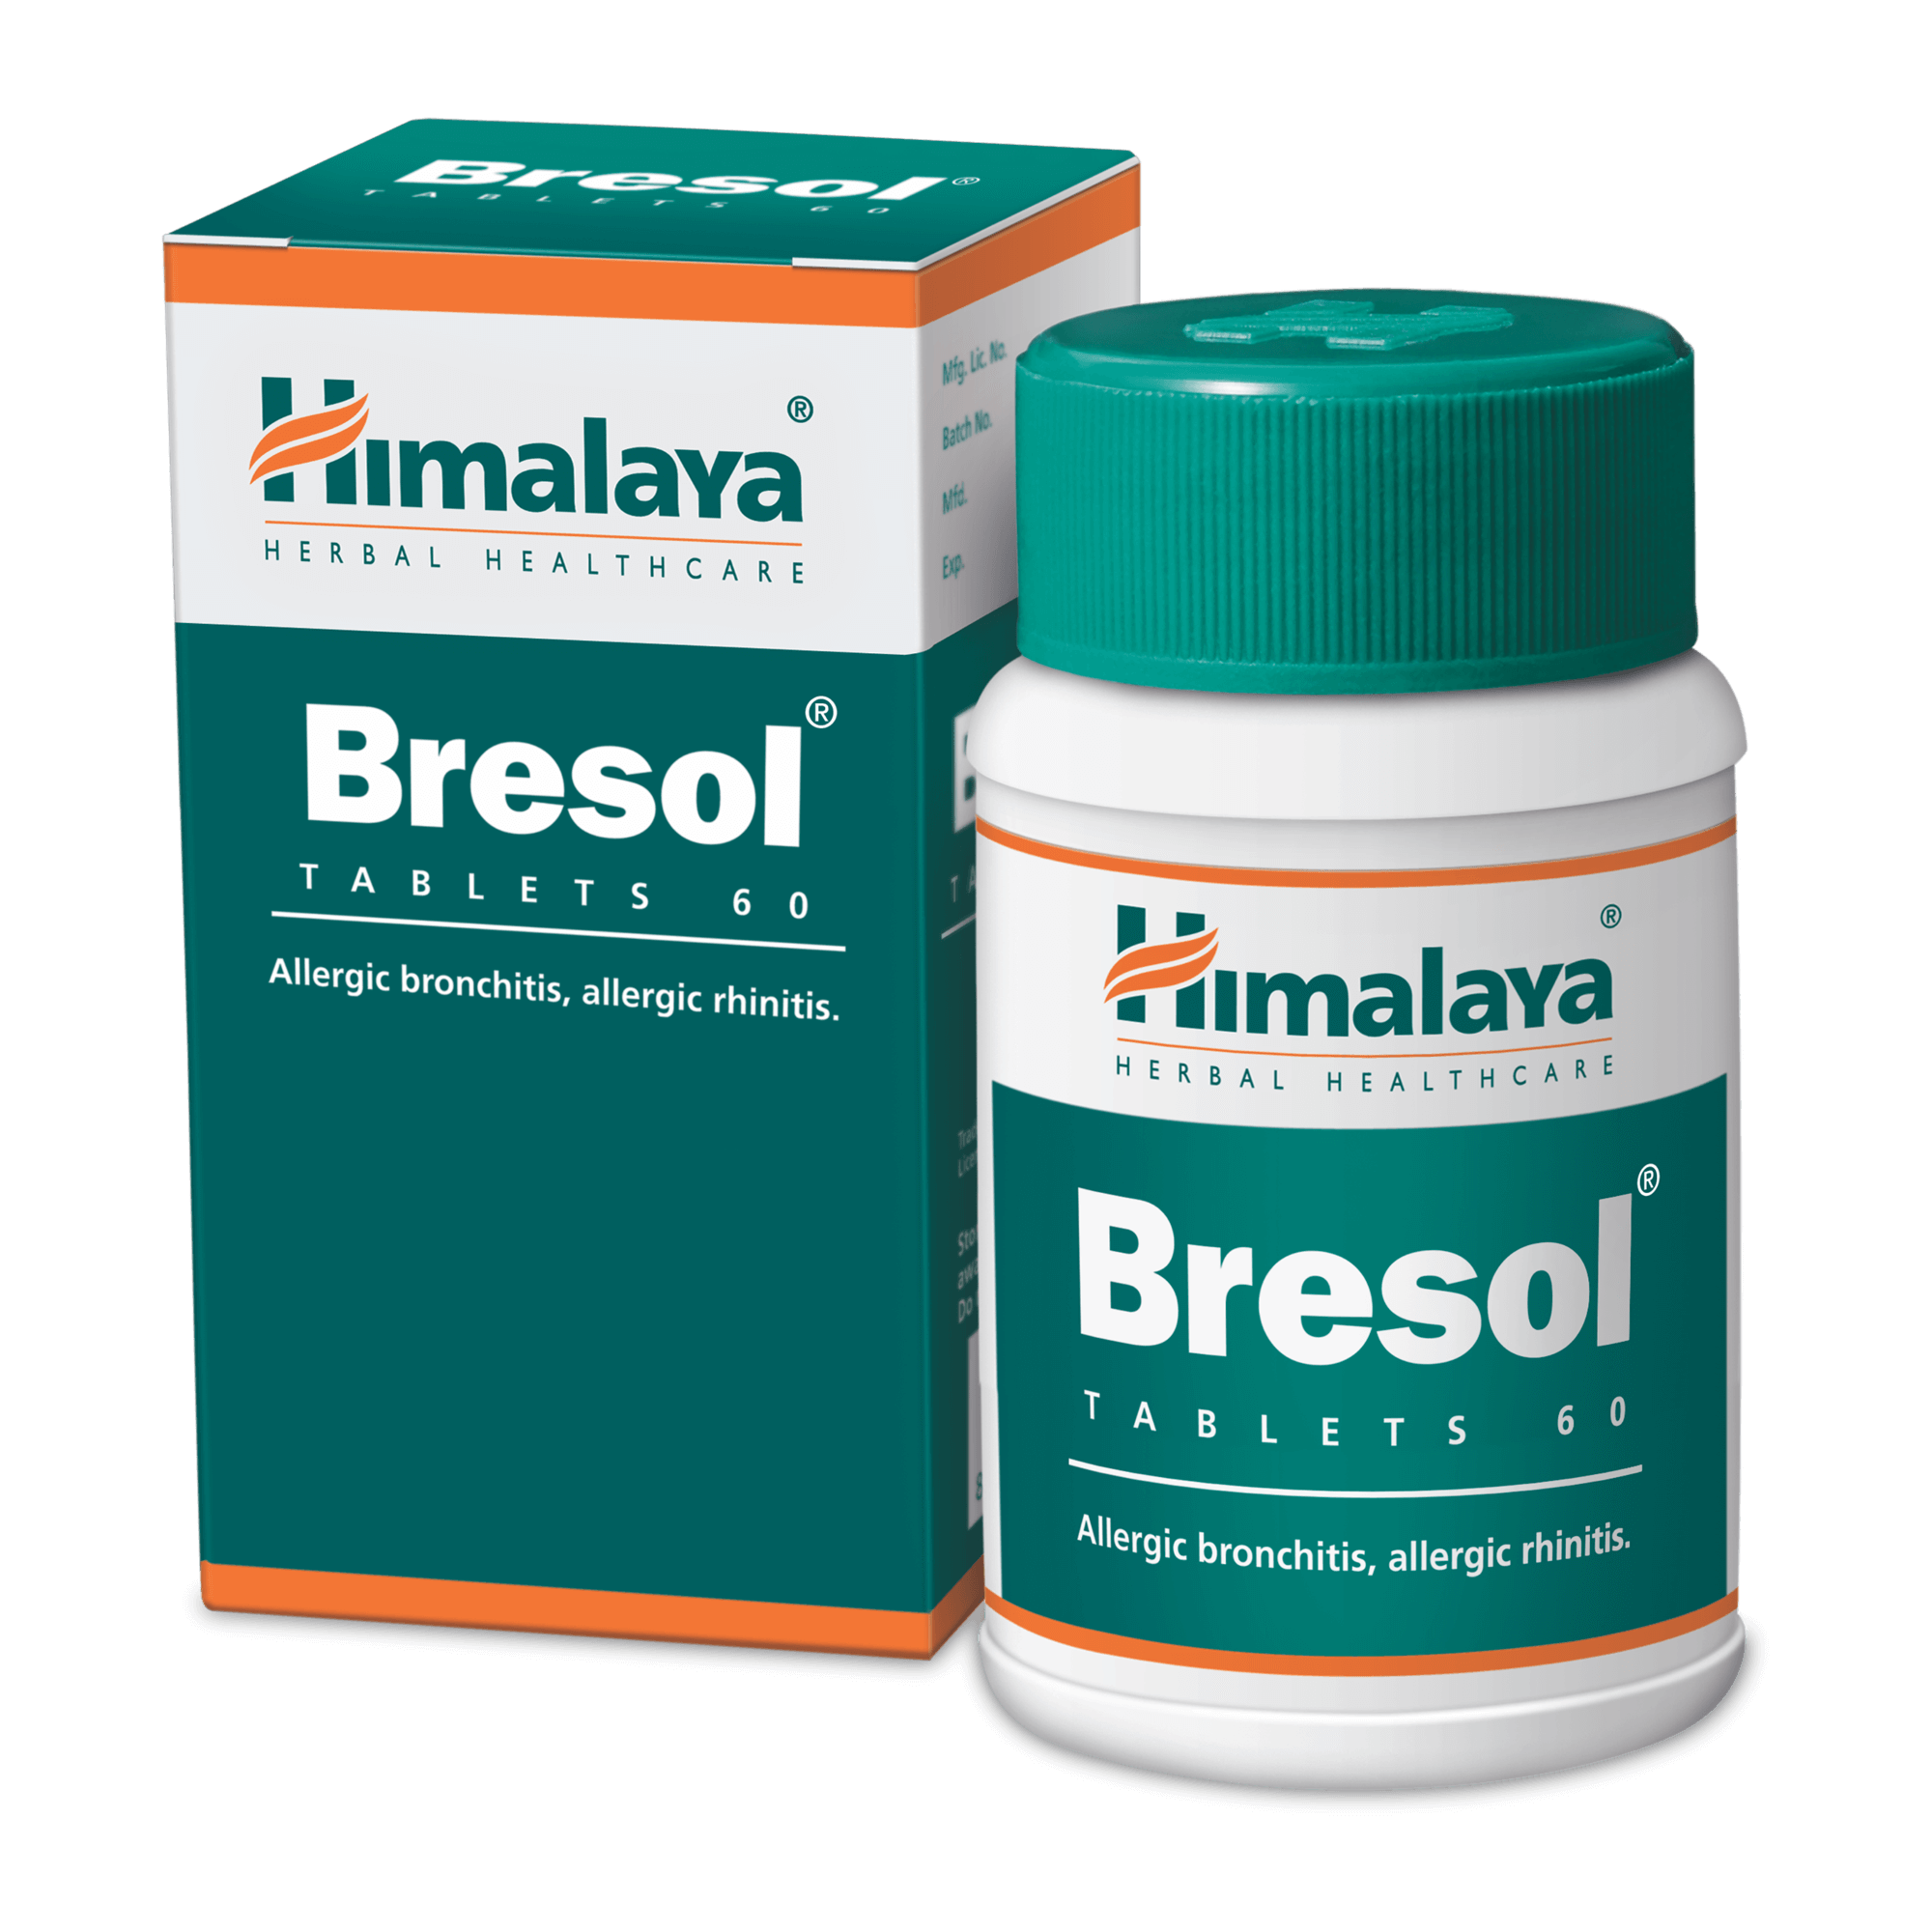 Himalaya Bresol - Tablets to fight respiratory diseases